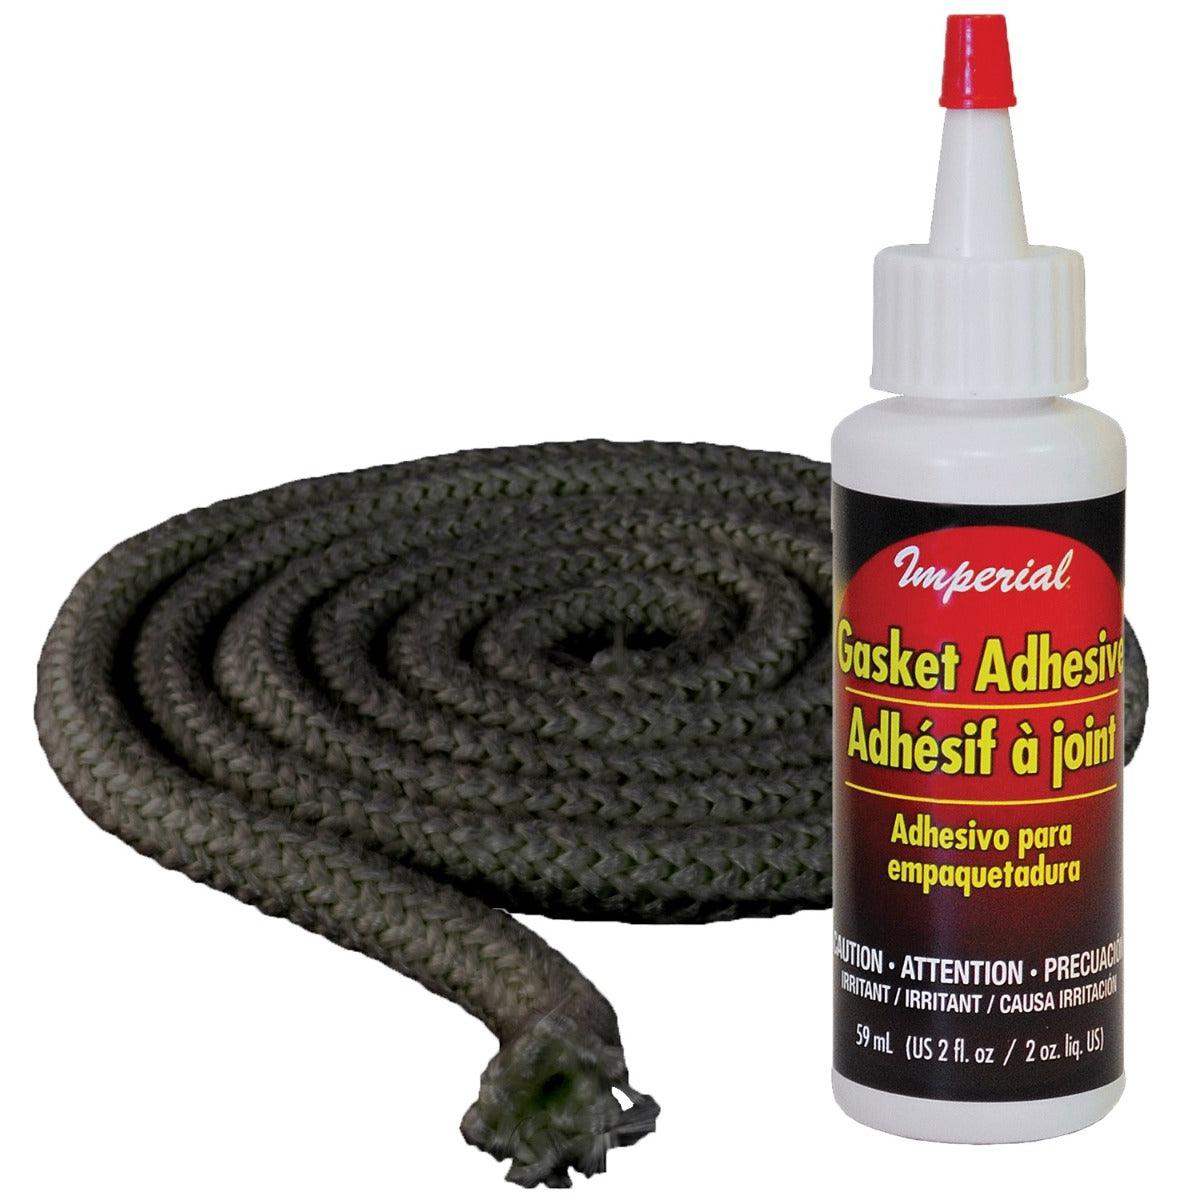 Harman Load and Ash Door Rope Gasket Kit 1/2in x 20ft - Woodstove Fireplace Glass